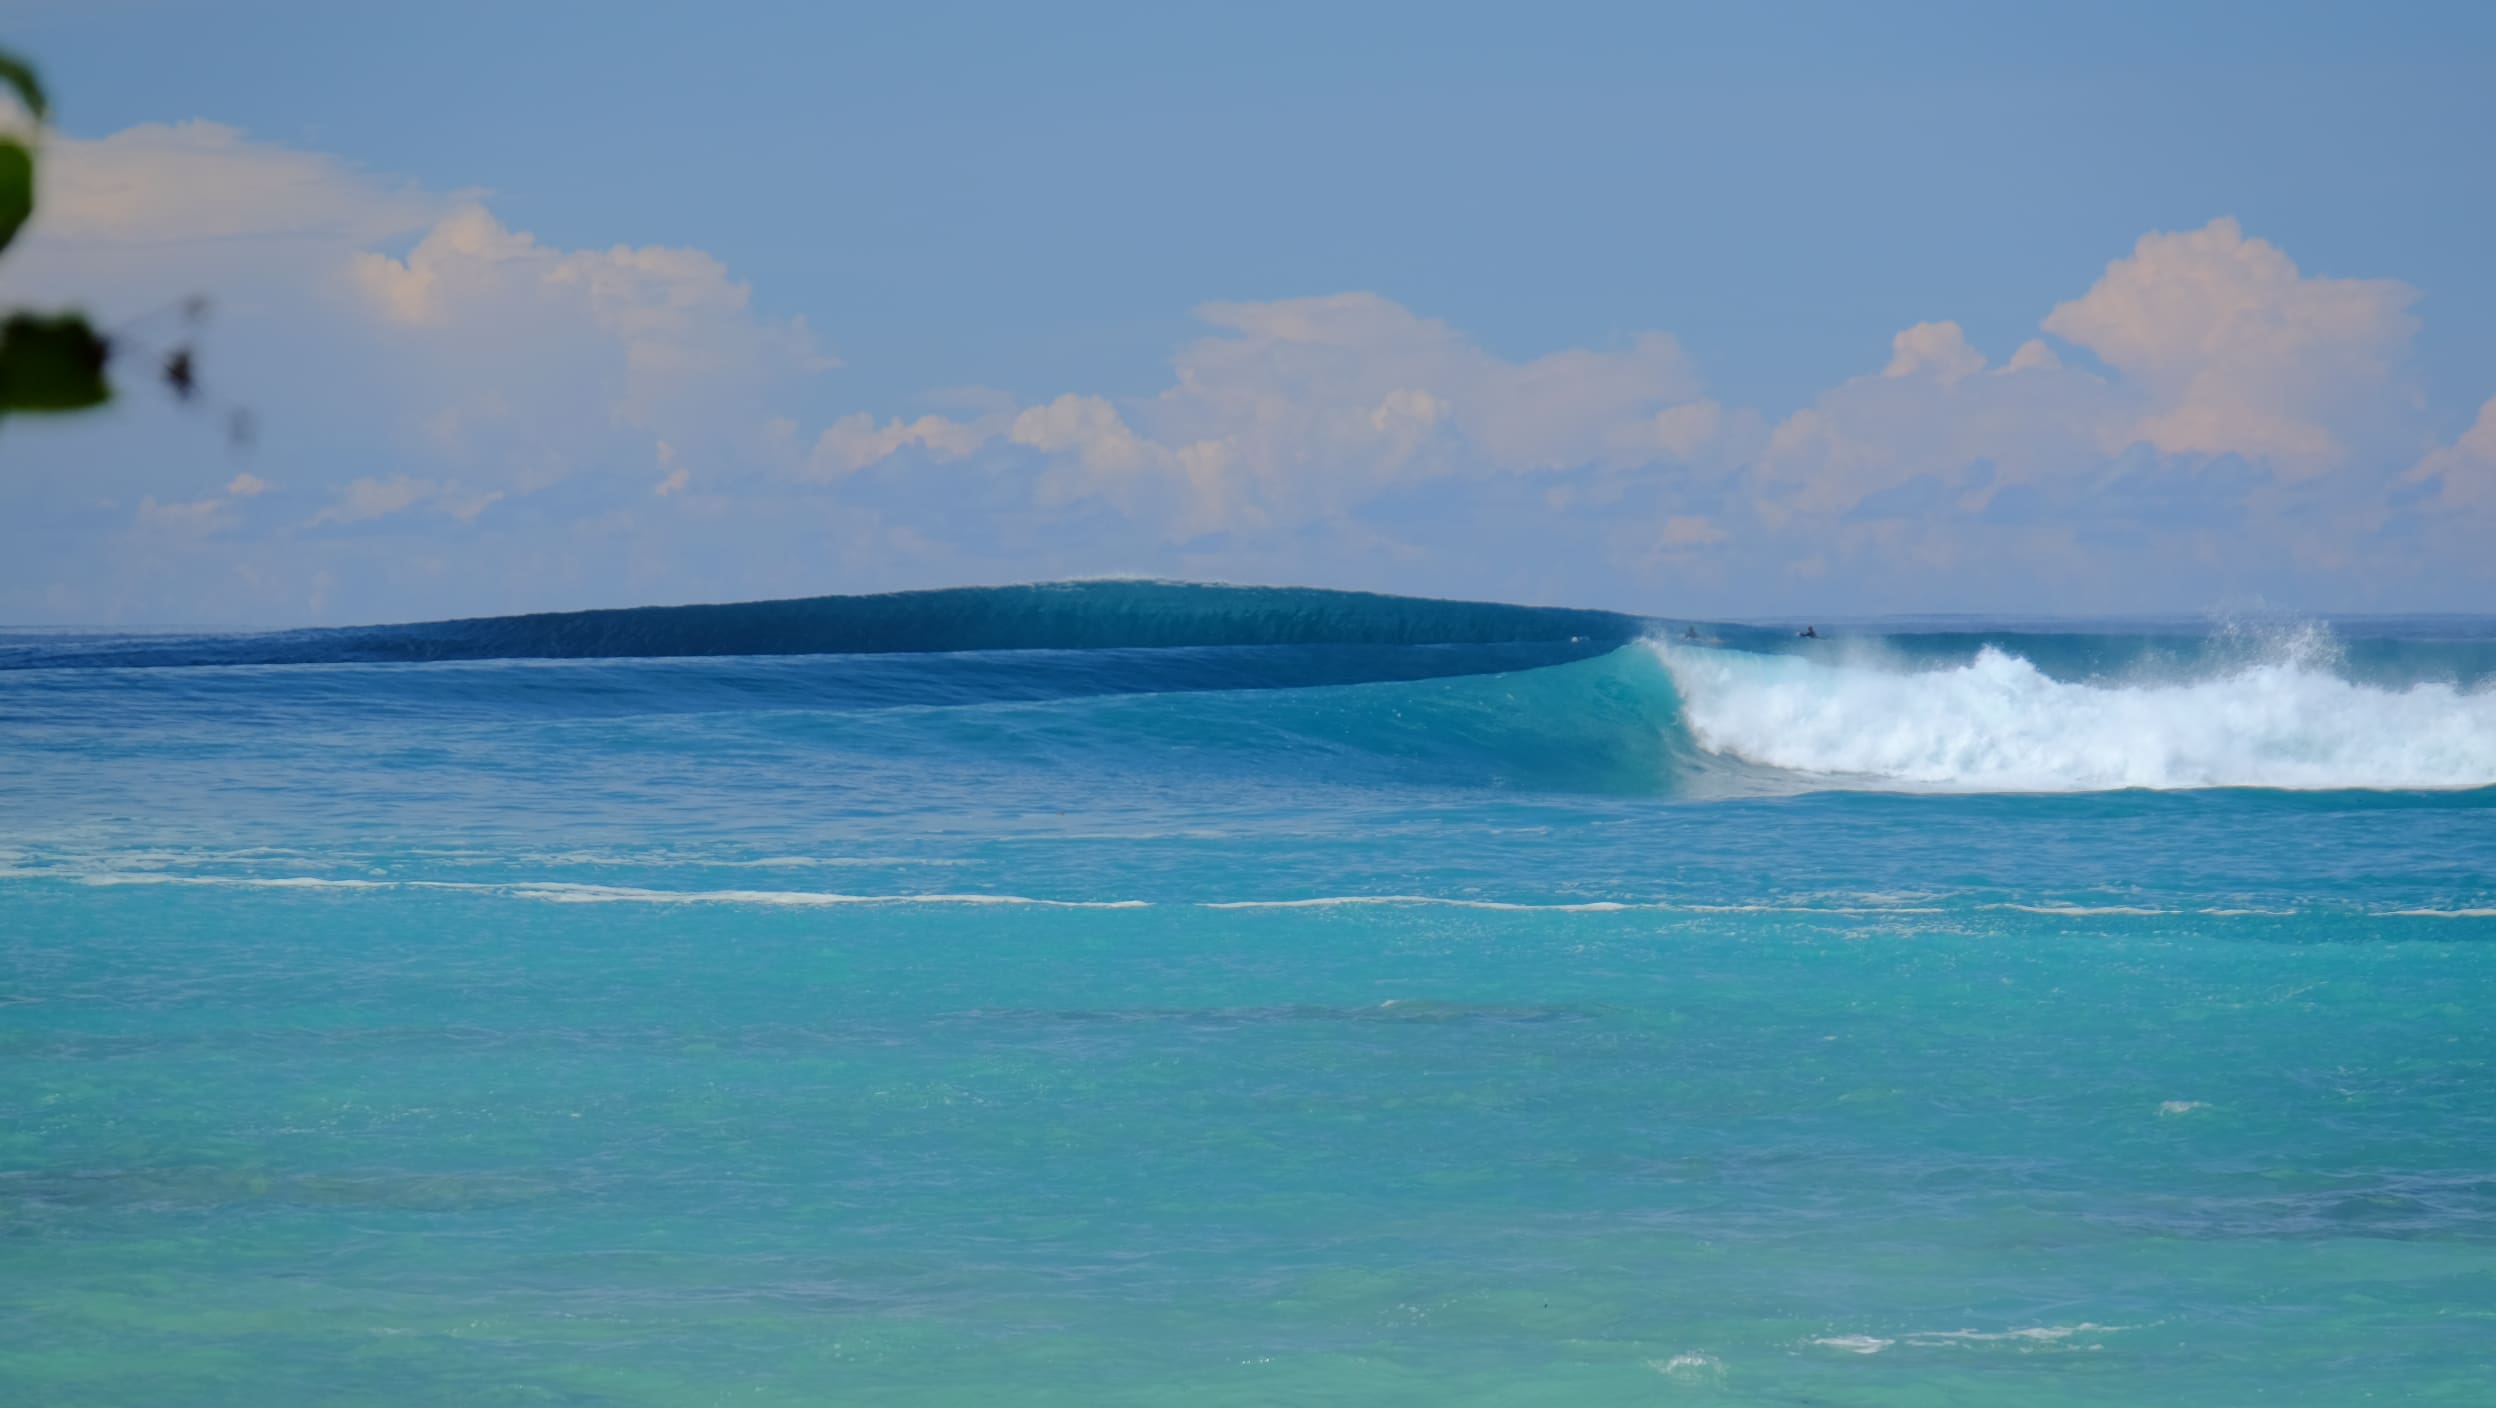 The Mentawai Surf Tax Just Doubled!